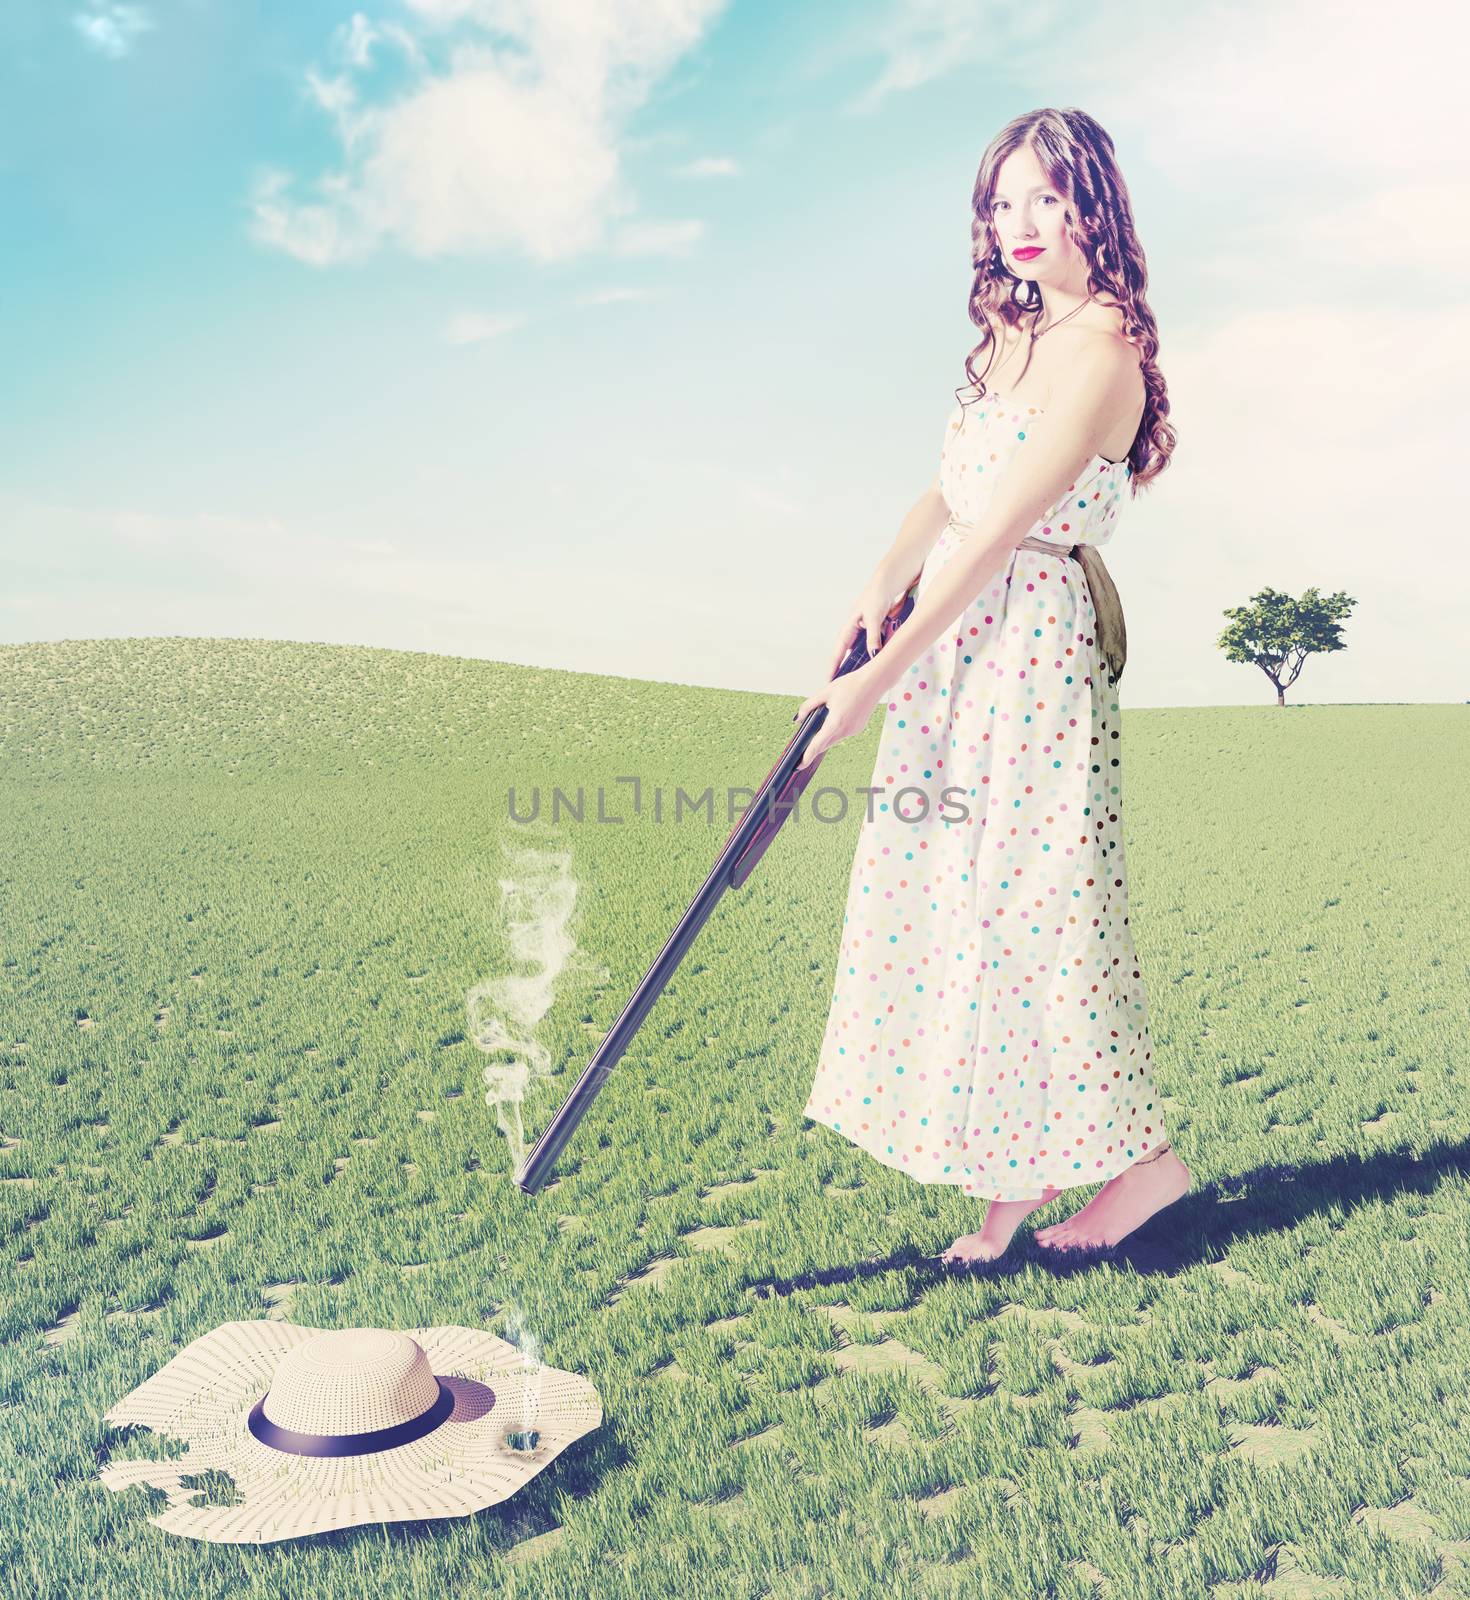 beautiful young girl  shot a flying hat. Creative concept photo and cg elements combinated